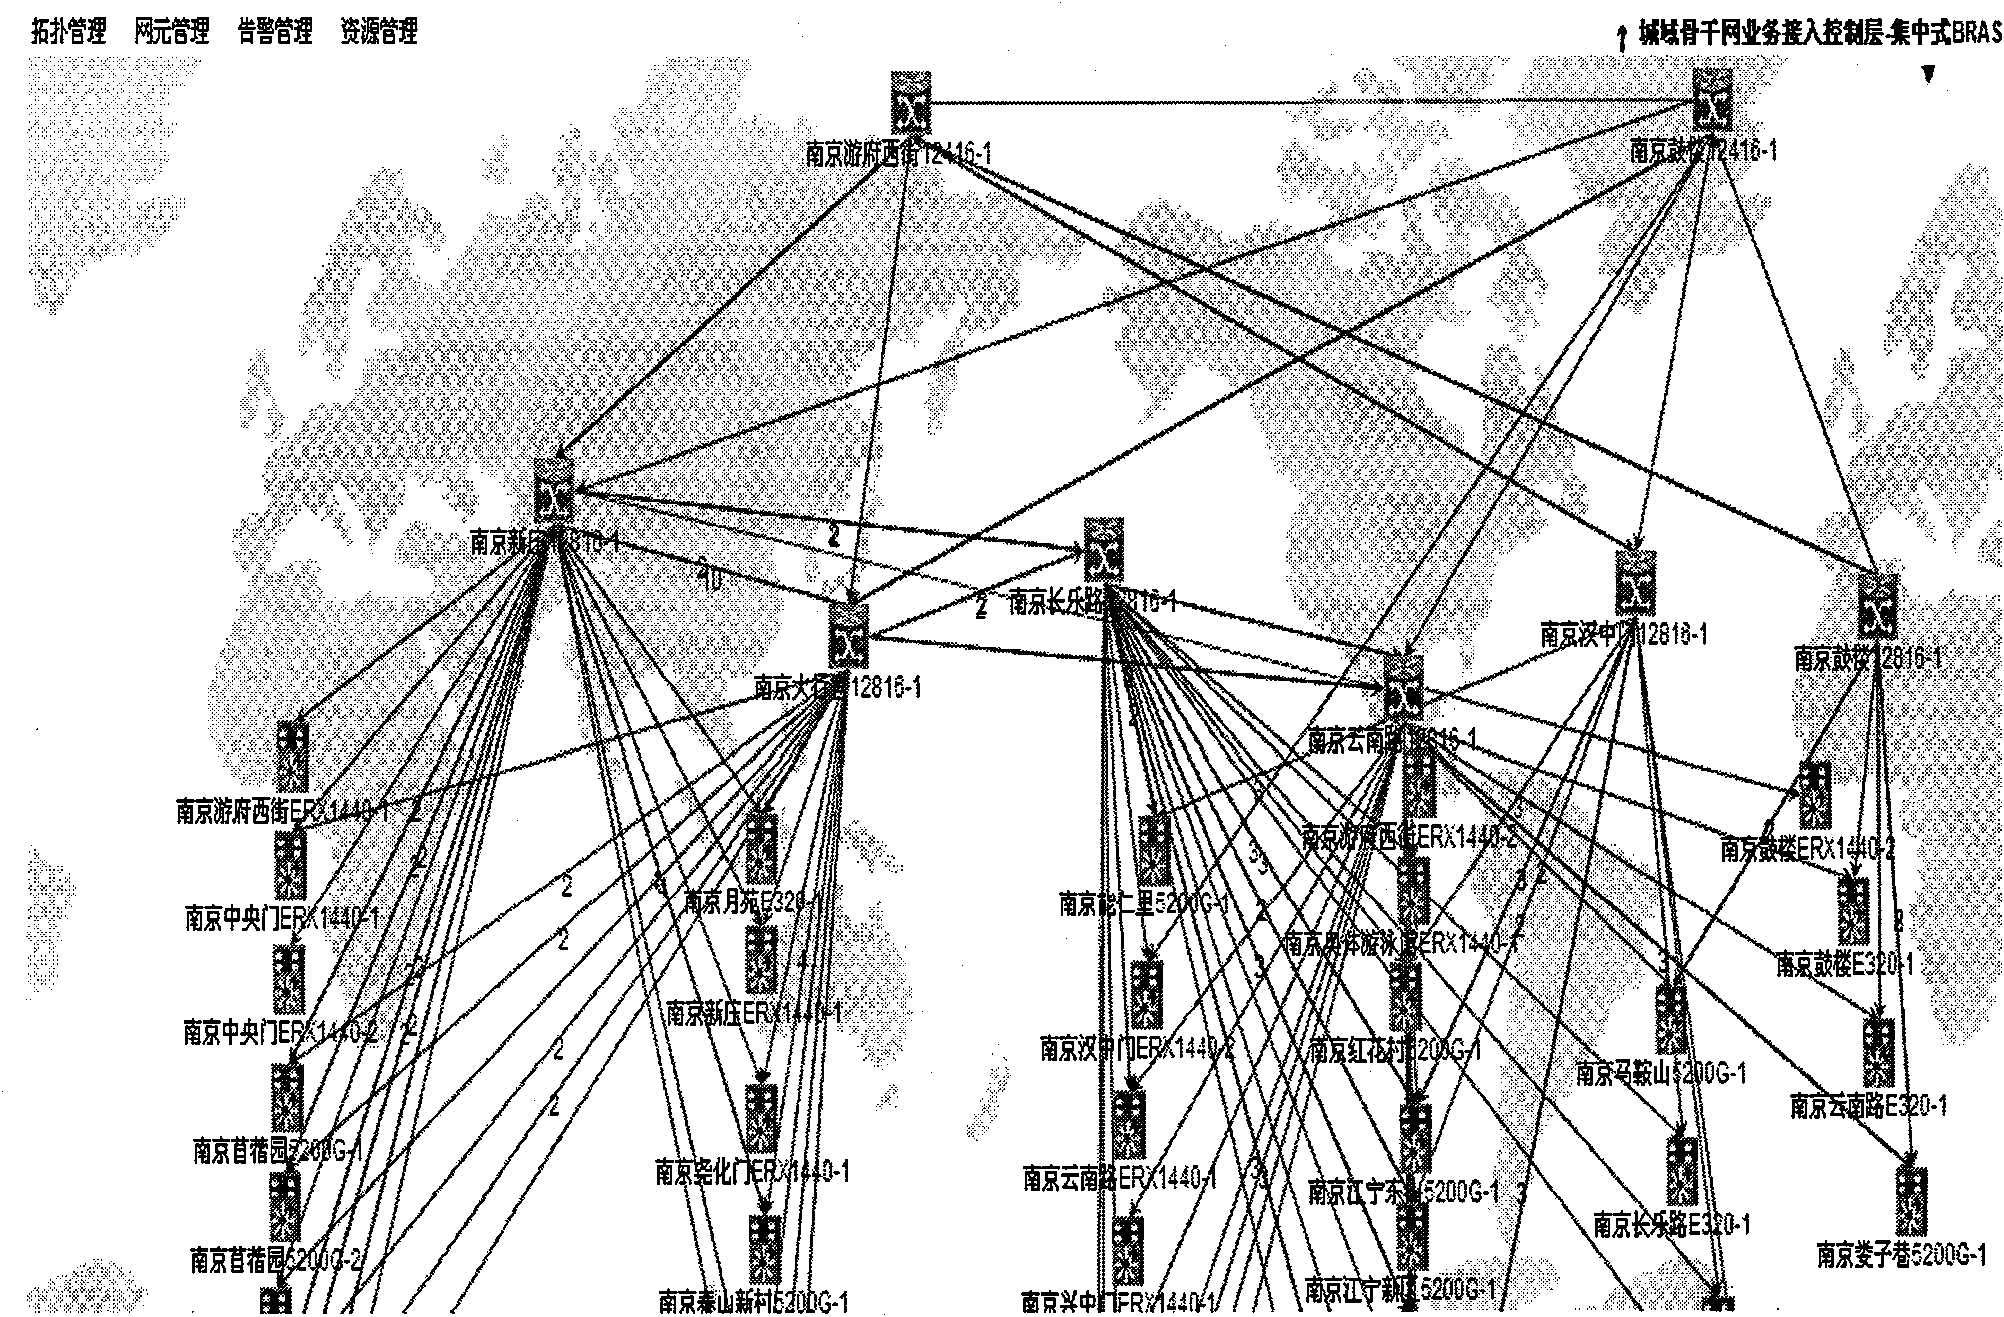 Network topology structure showing method based on plane mode